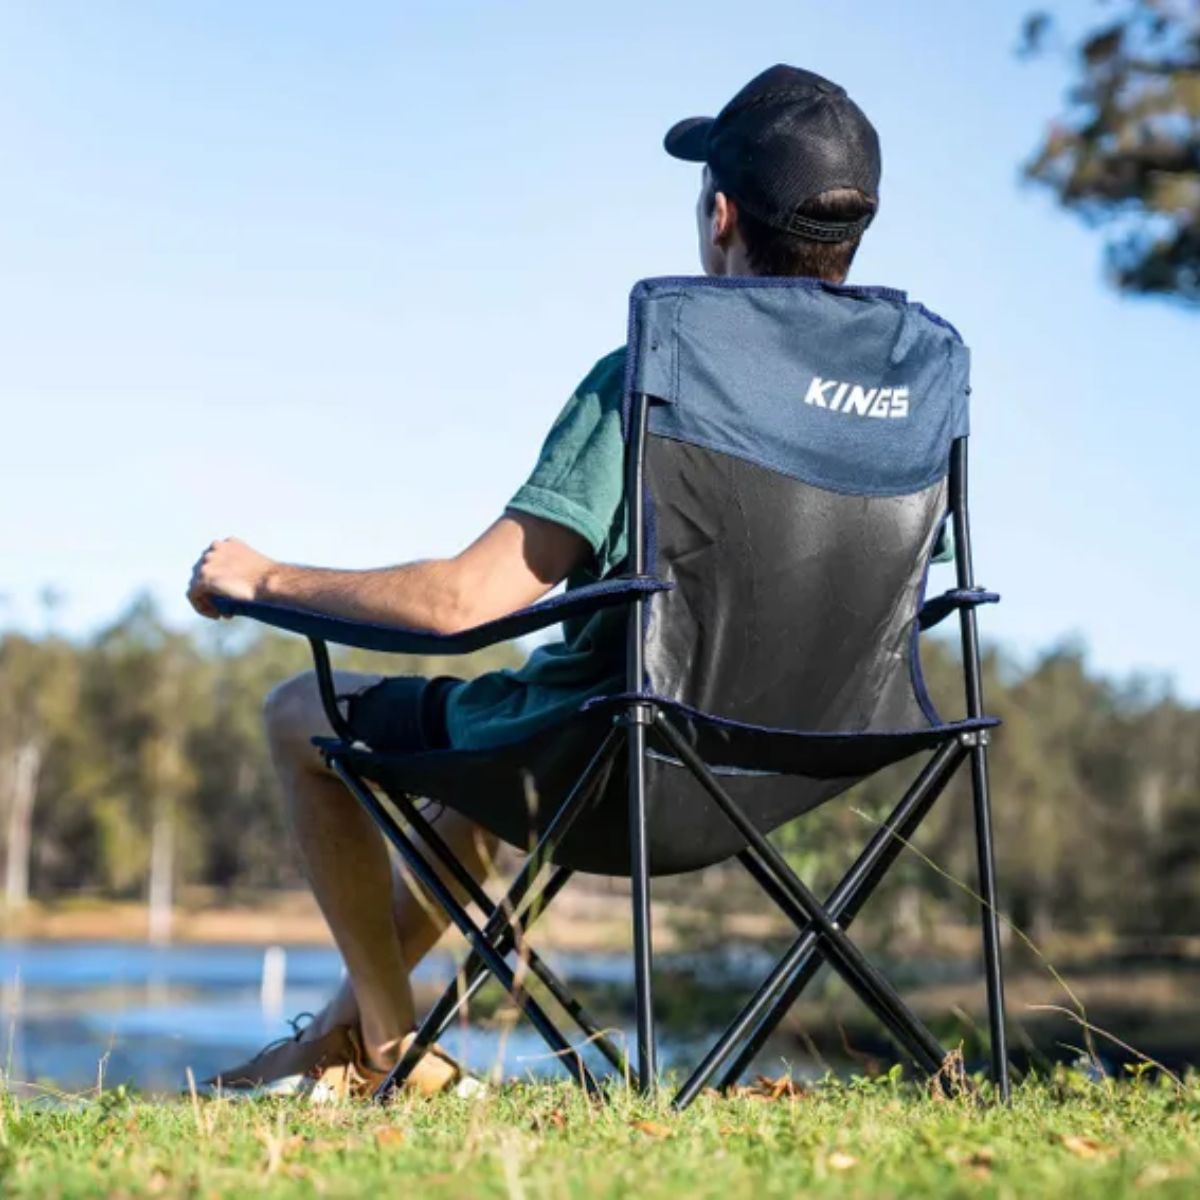 Kings Essential Camping Chair | Light Weight | Included Carry Bag Full Throttle Pakistan